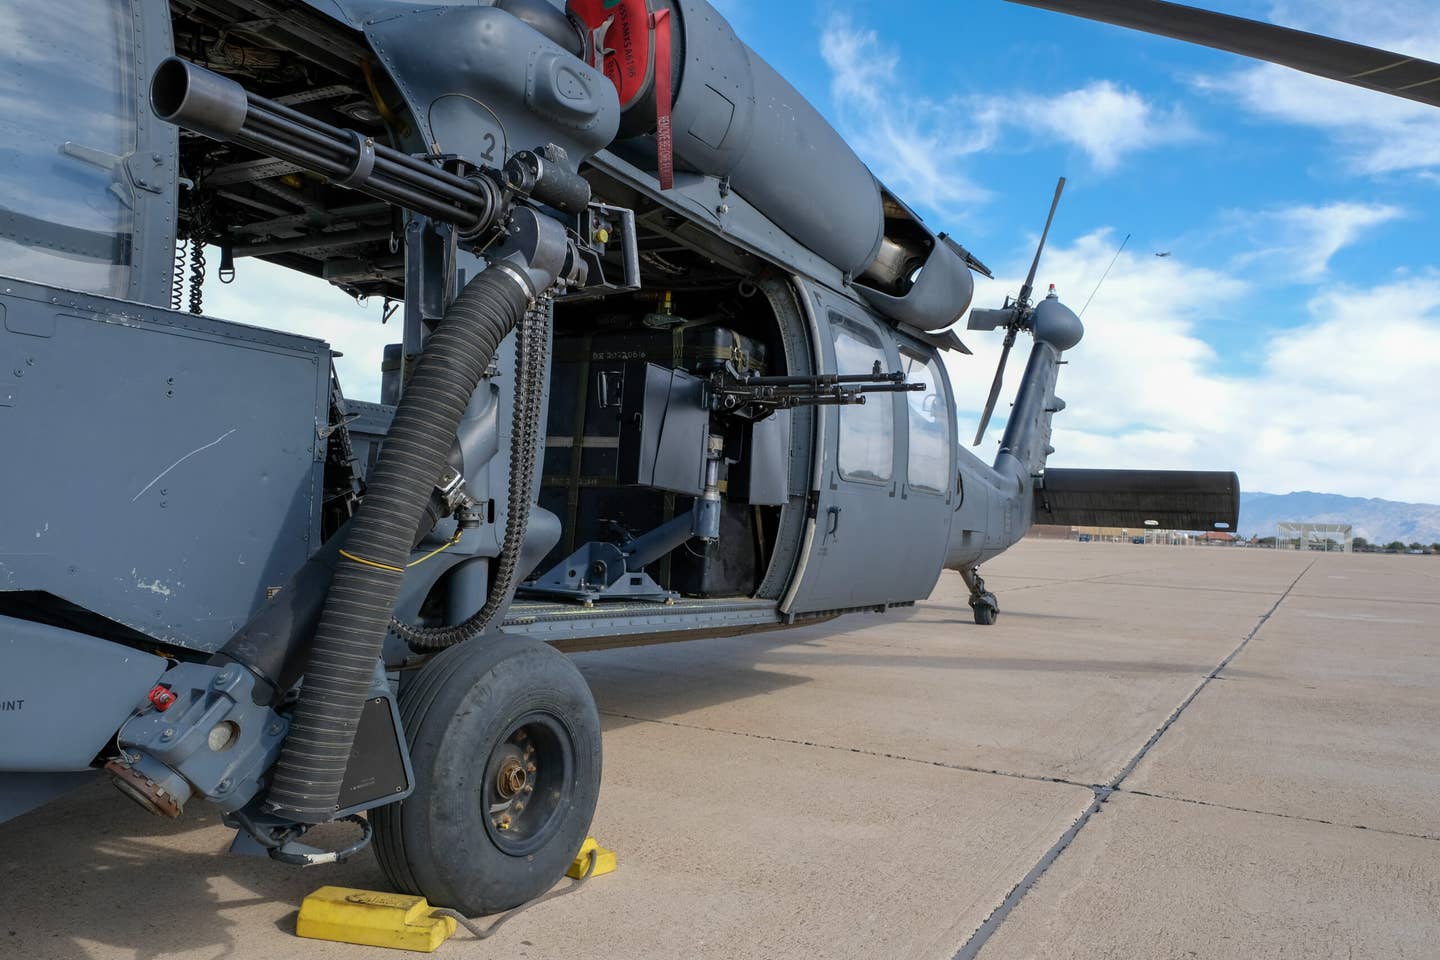 Two M240s are mounted inside an HH-60G Pave Hawk helicopter Nov. 22, 2022, at Davis-Monthan Air Force Base, Arizona. <em>Credit: U.S. Air Force photo by Andre Trinidad</em>